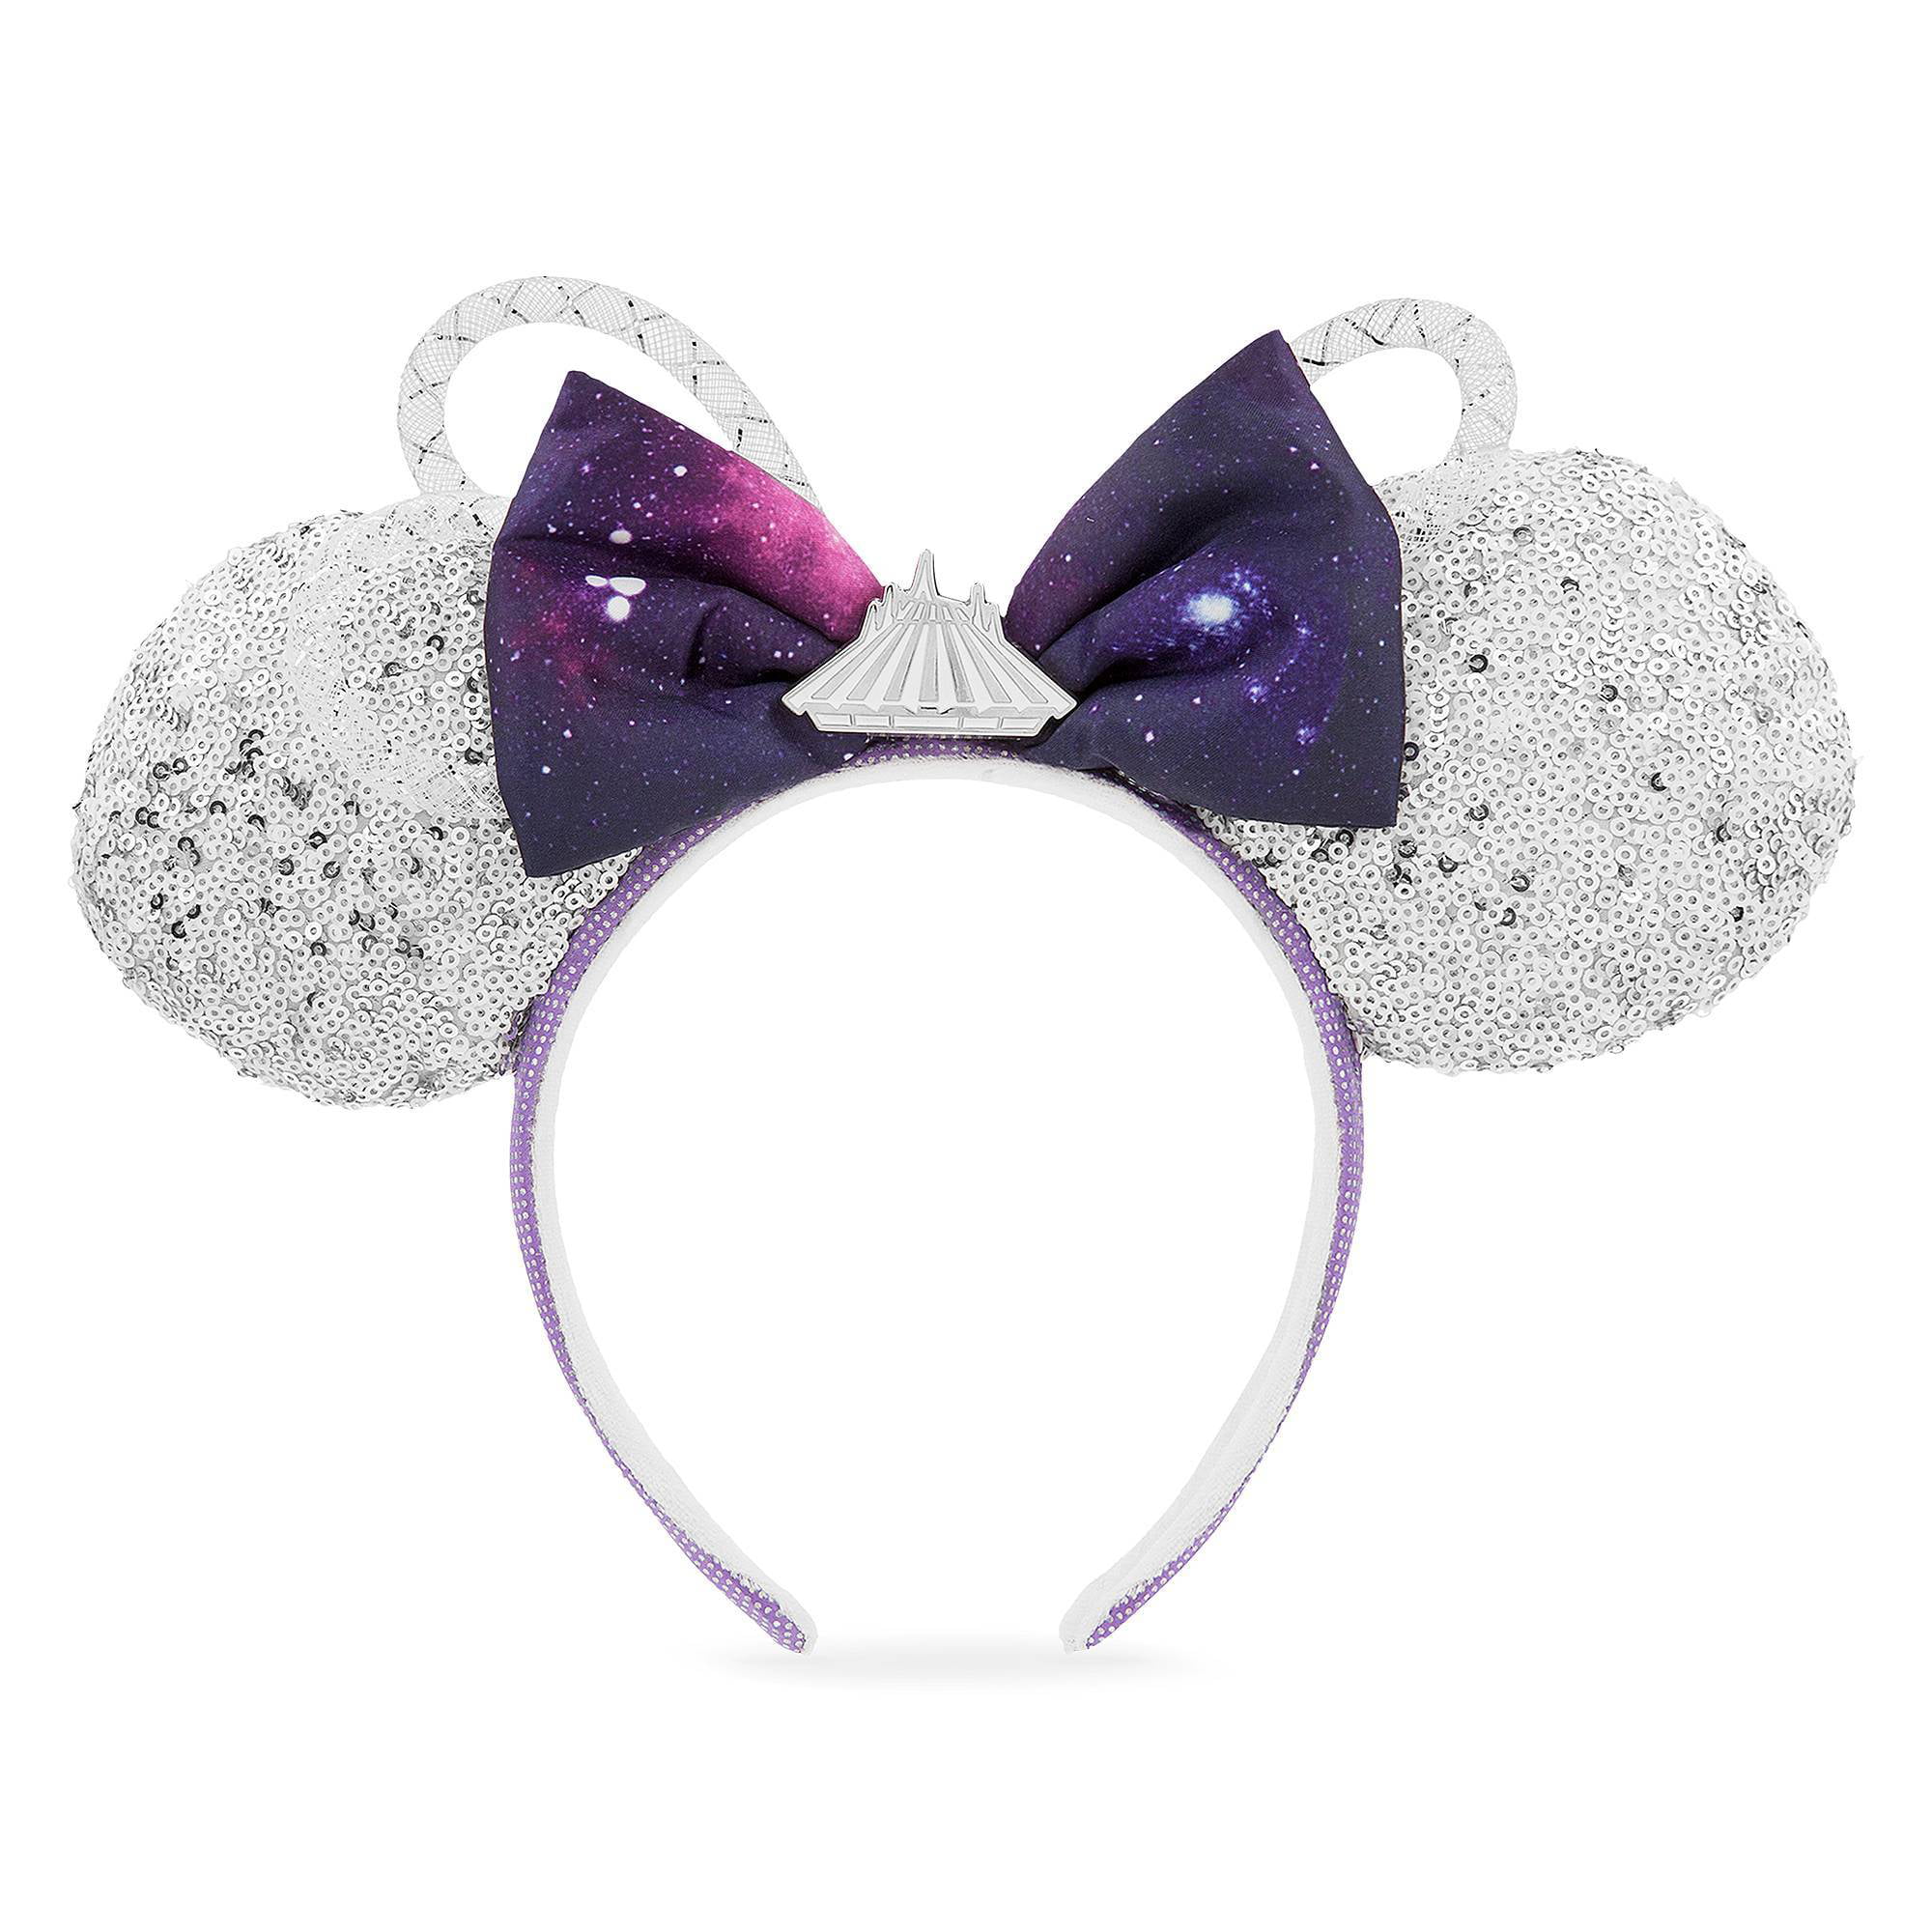 Details about   Disney Parks Multicolor Sequins Party New Mickey Minnie Mouse Ears Cos Headband 